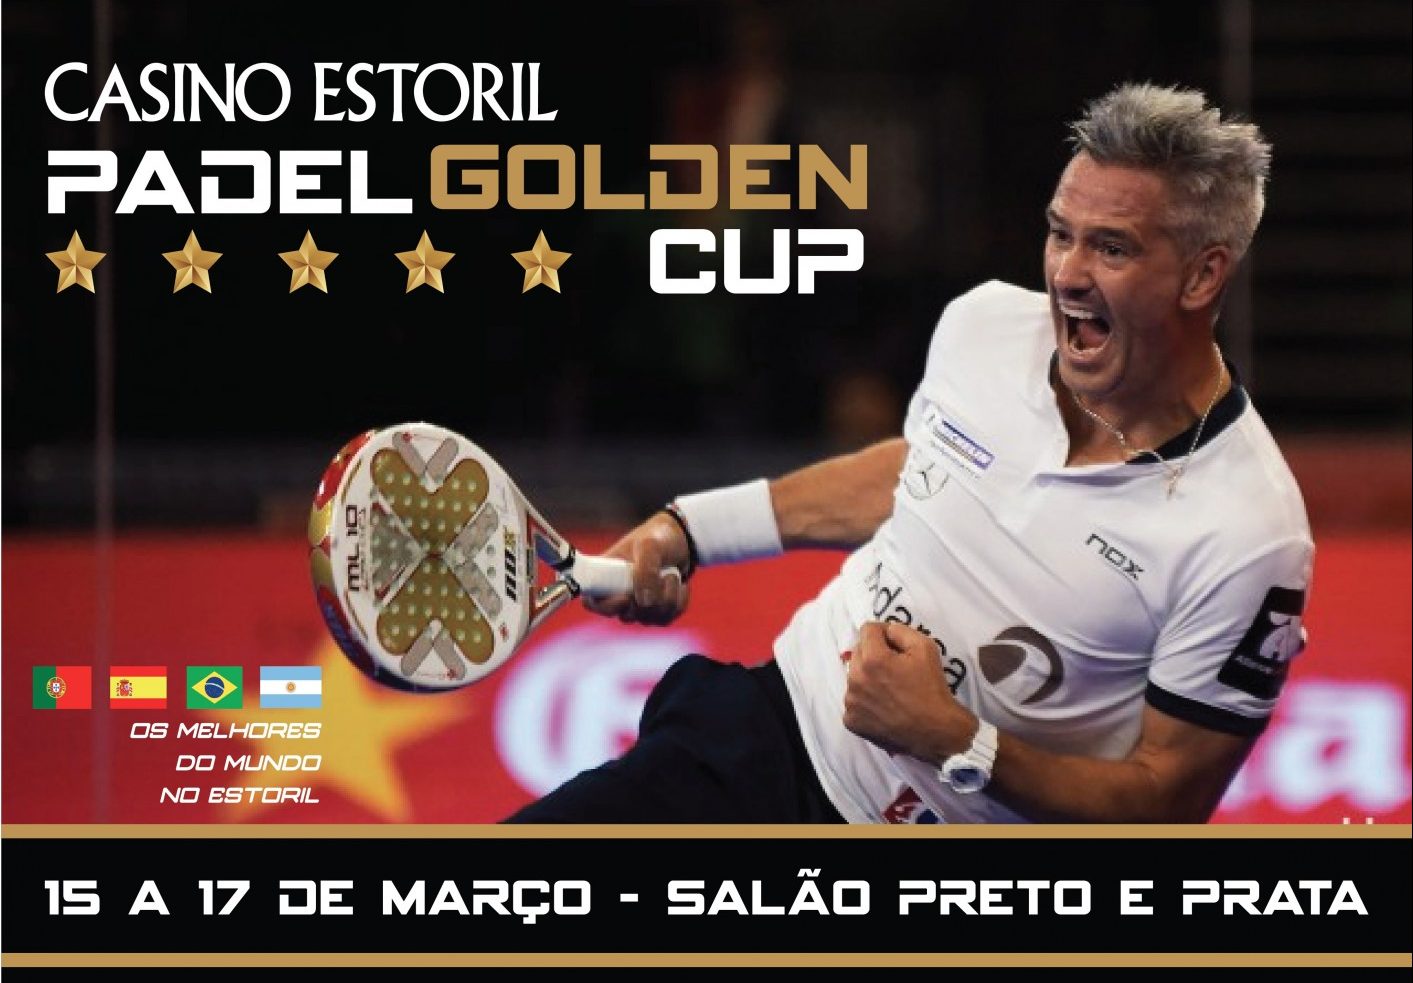 Le Padel Golden Cup will be the center of the world